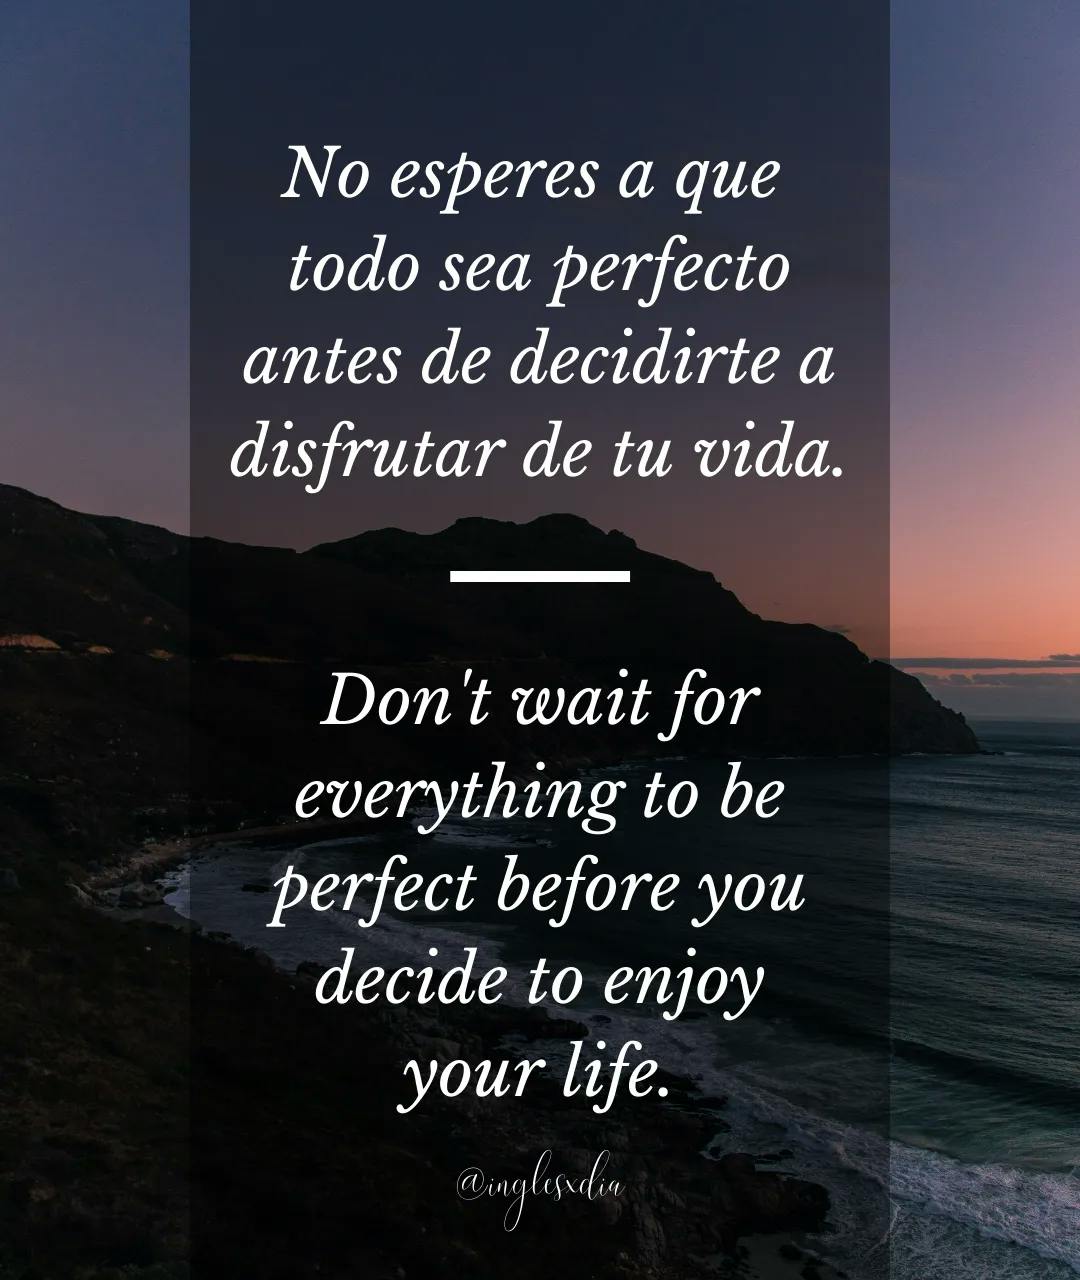 Frases motivadoras en inglés: Don't wait for everything to be perfect before you decide to enjoy your life.